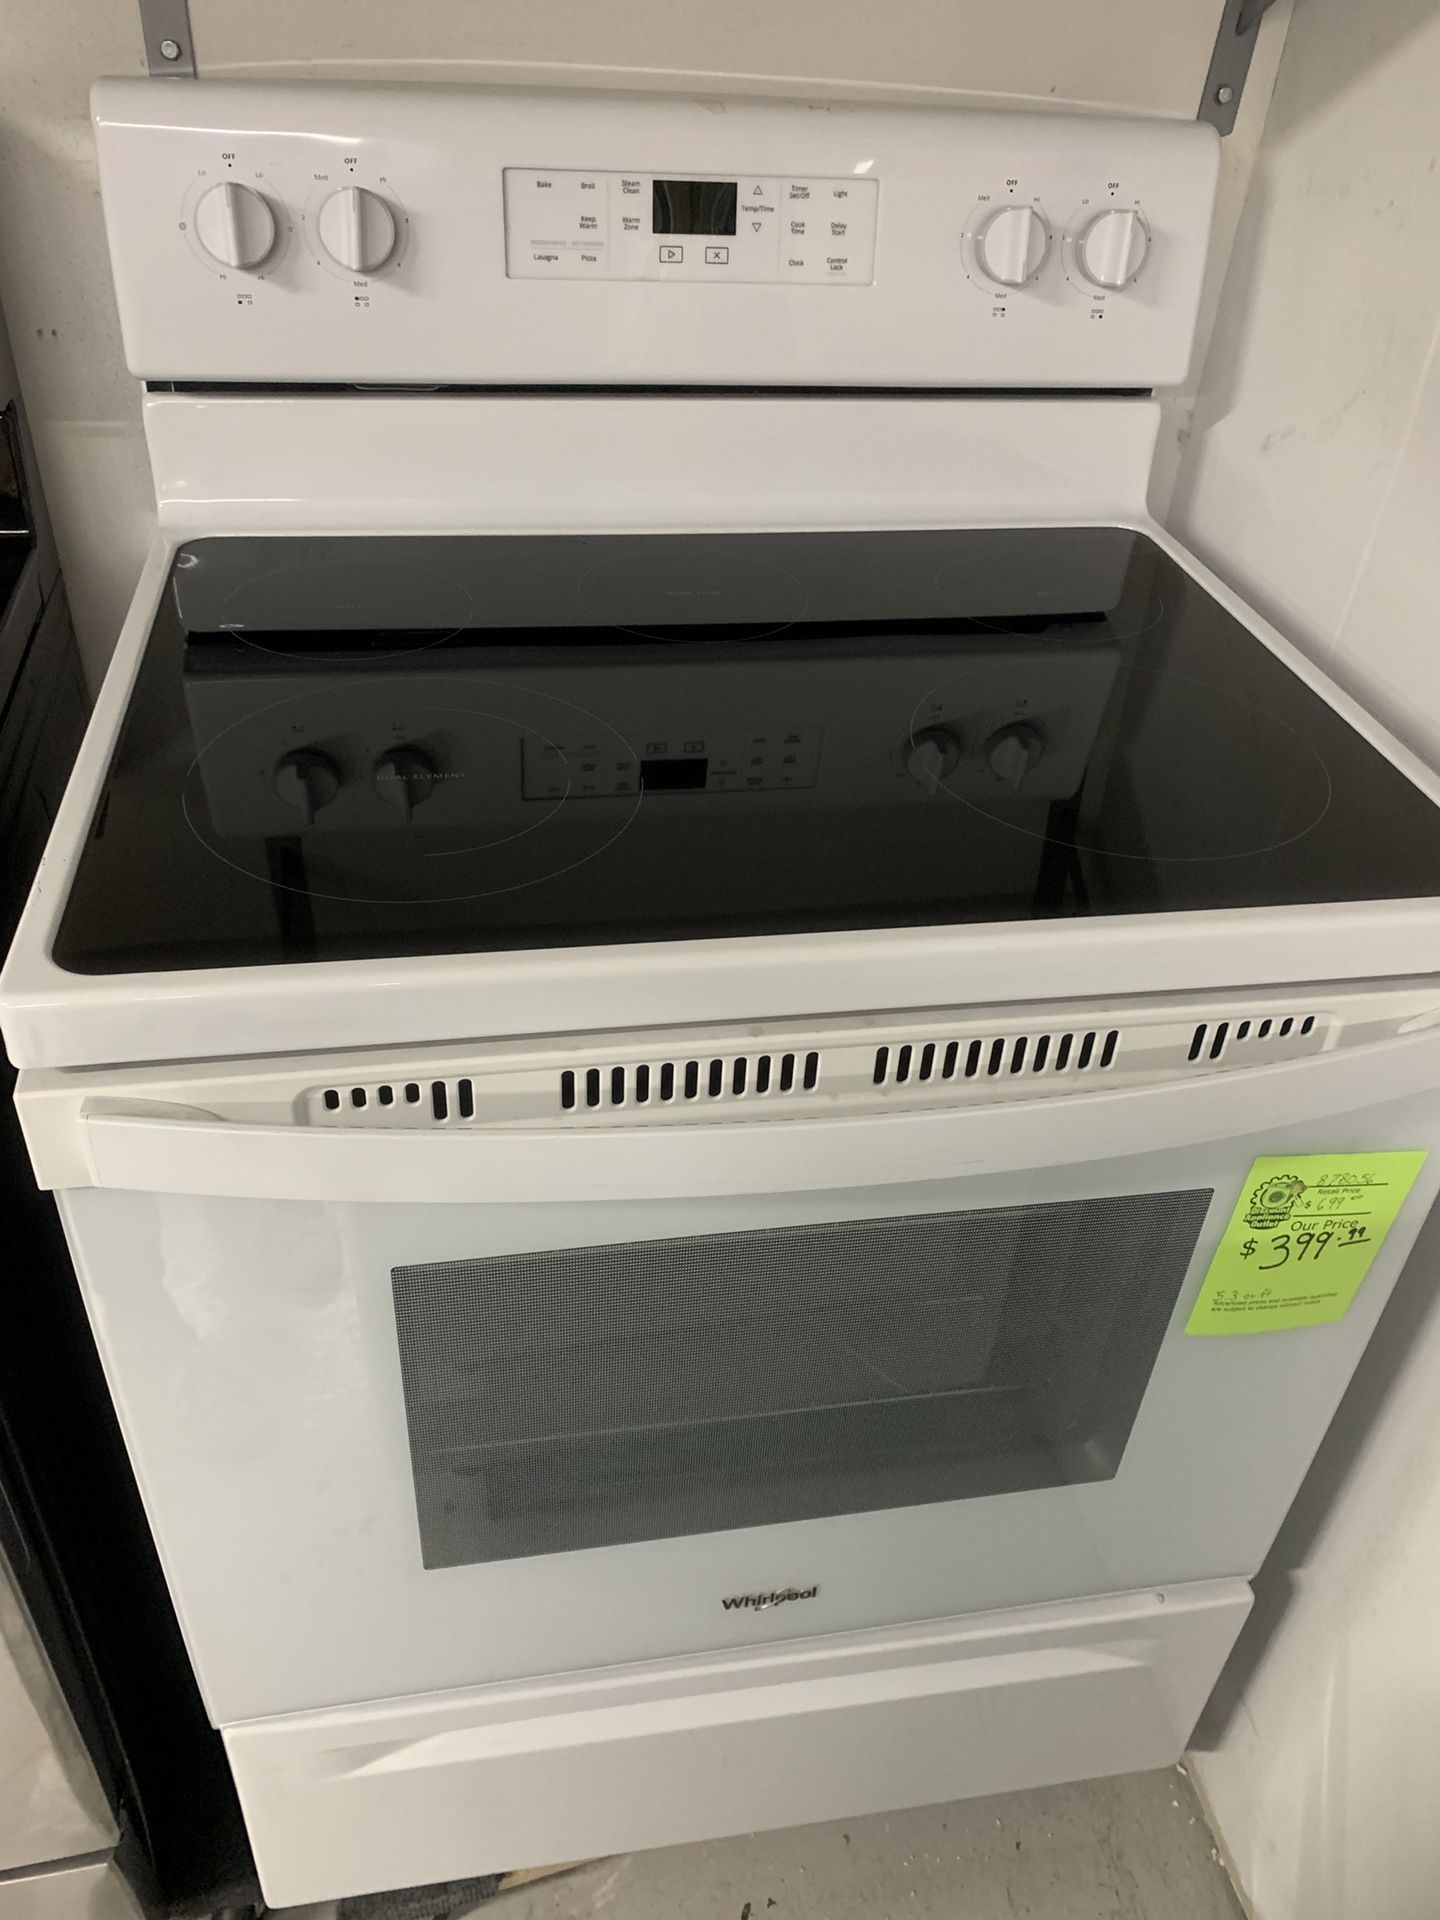 NEW WHIRLPOOL WHITE GLASS TOP STOVE ELECTRIC RANGE